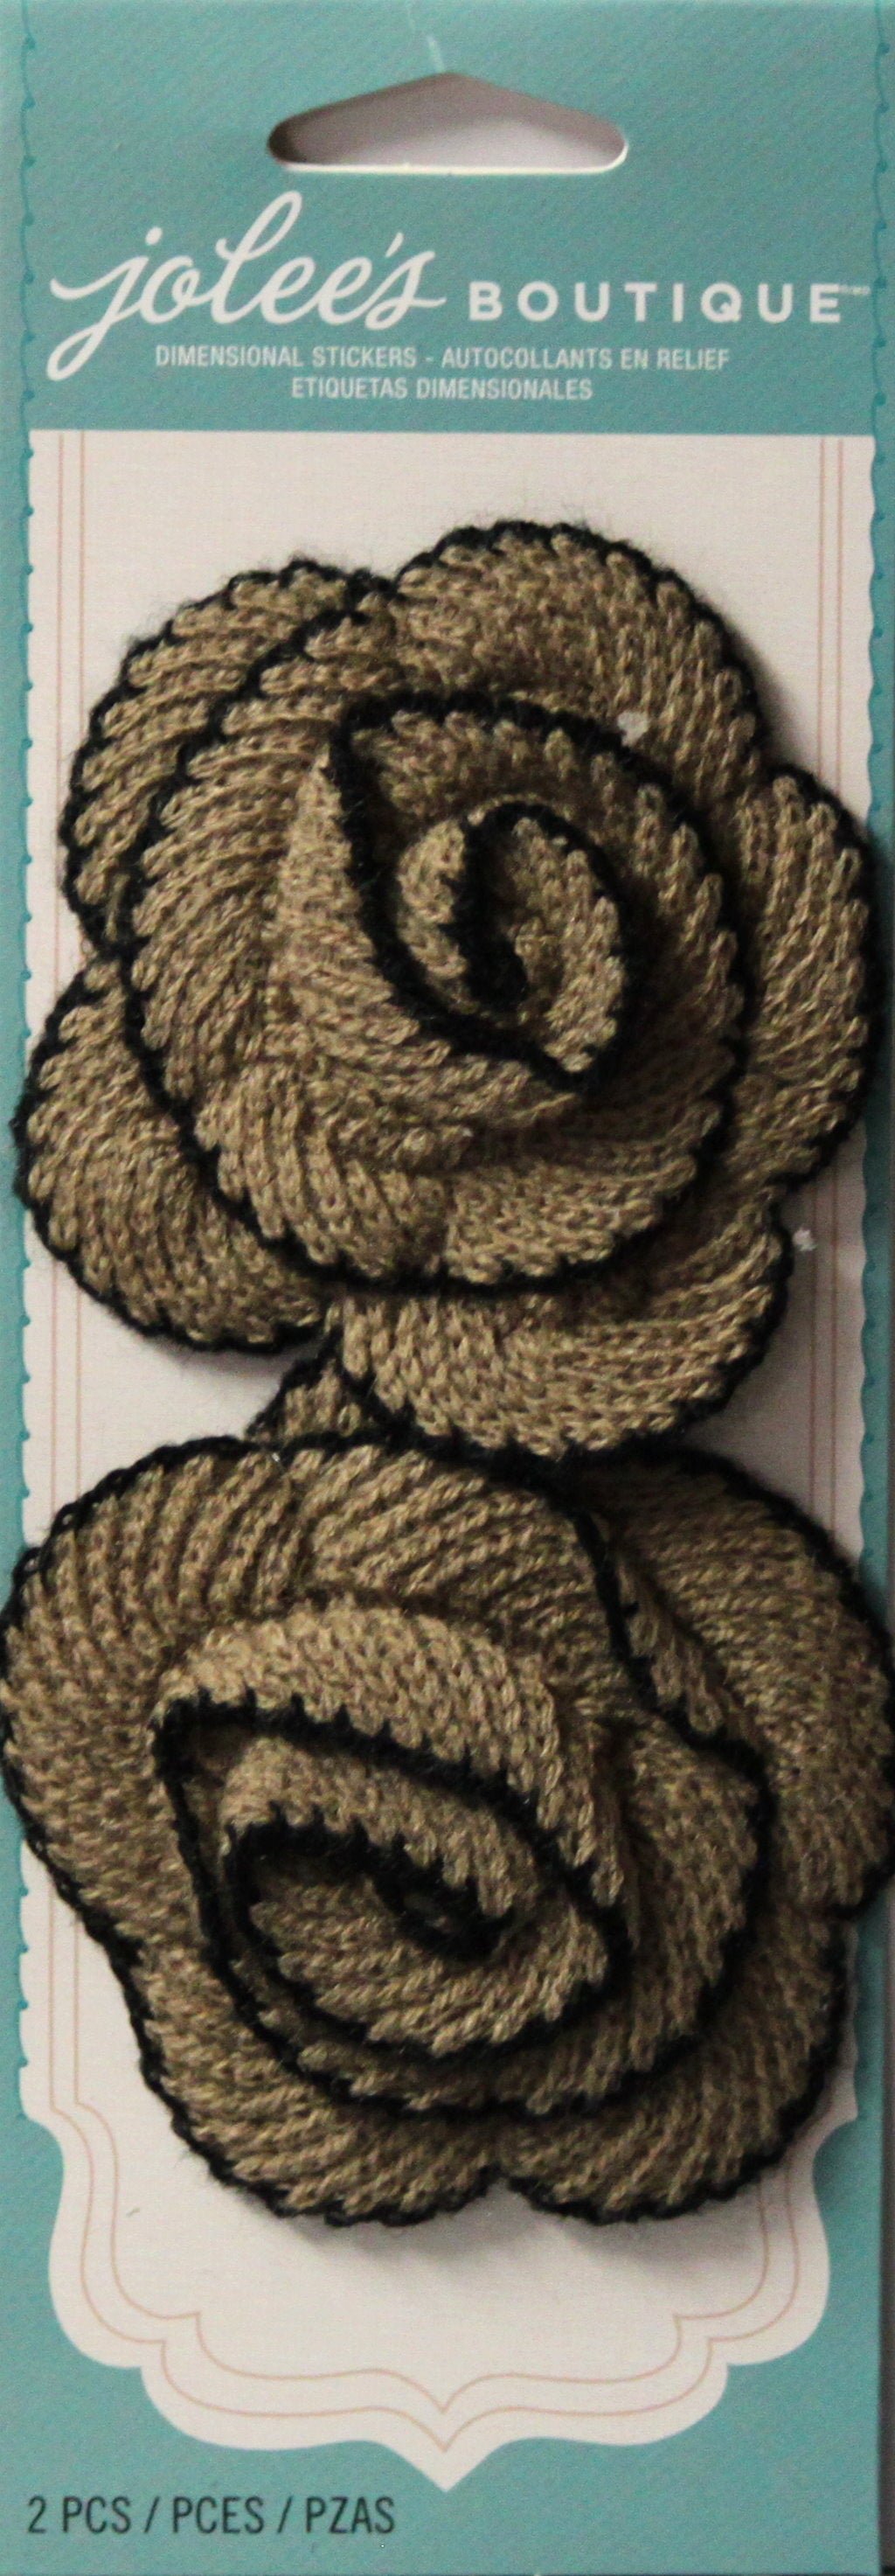 Jolee's Boutique Black Tan Knit Spiral Flowers Stickers